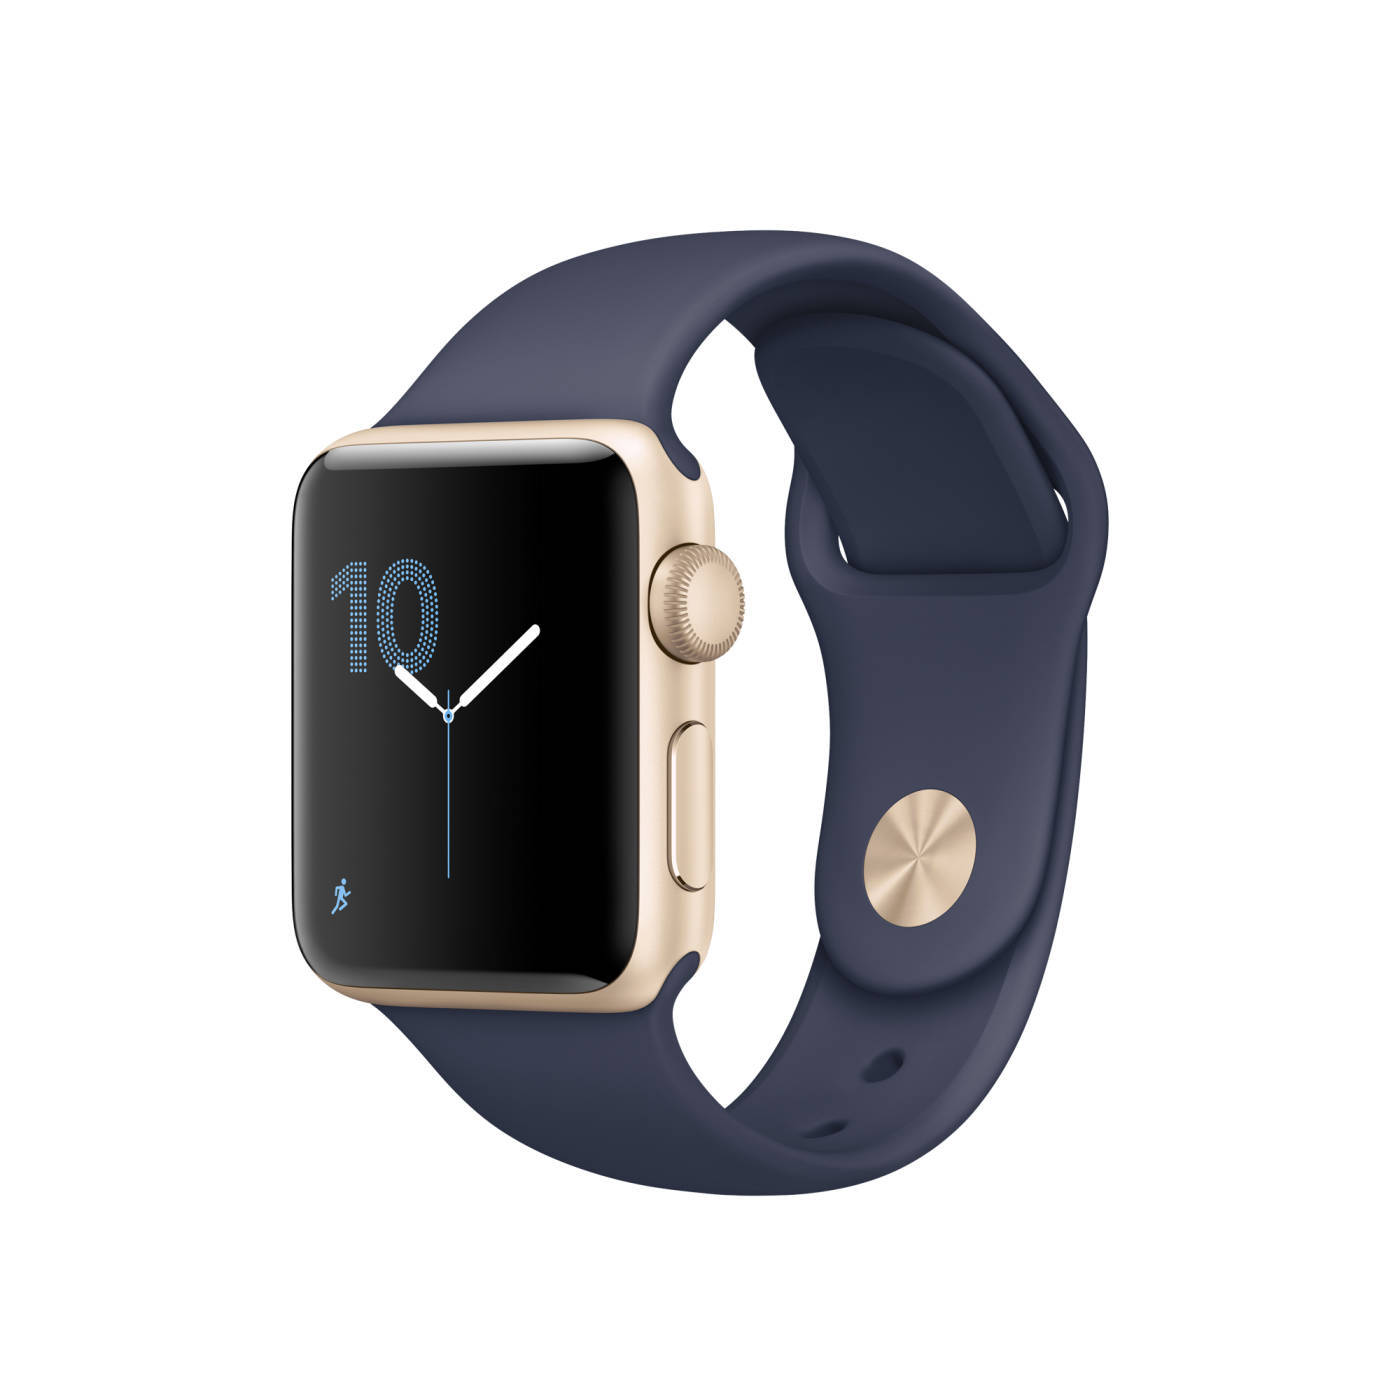 Apple Watch Series 2 - Full specification - Where to buy?